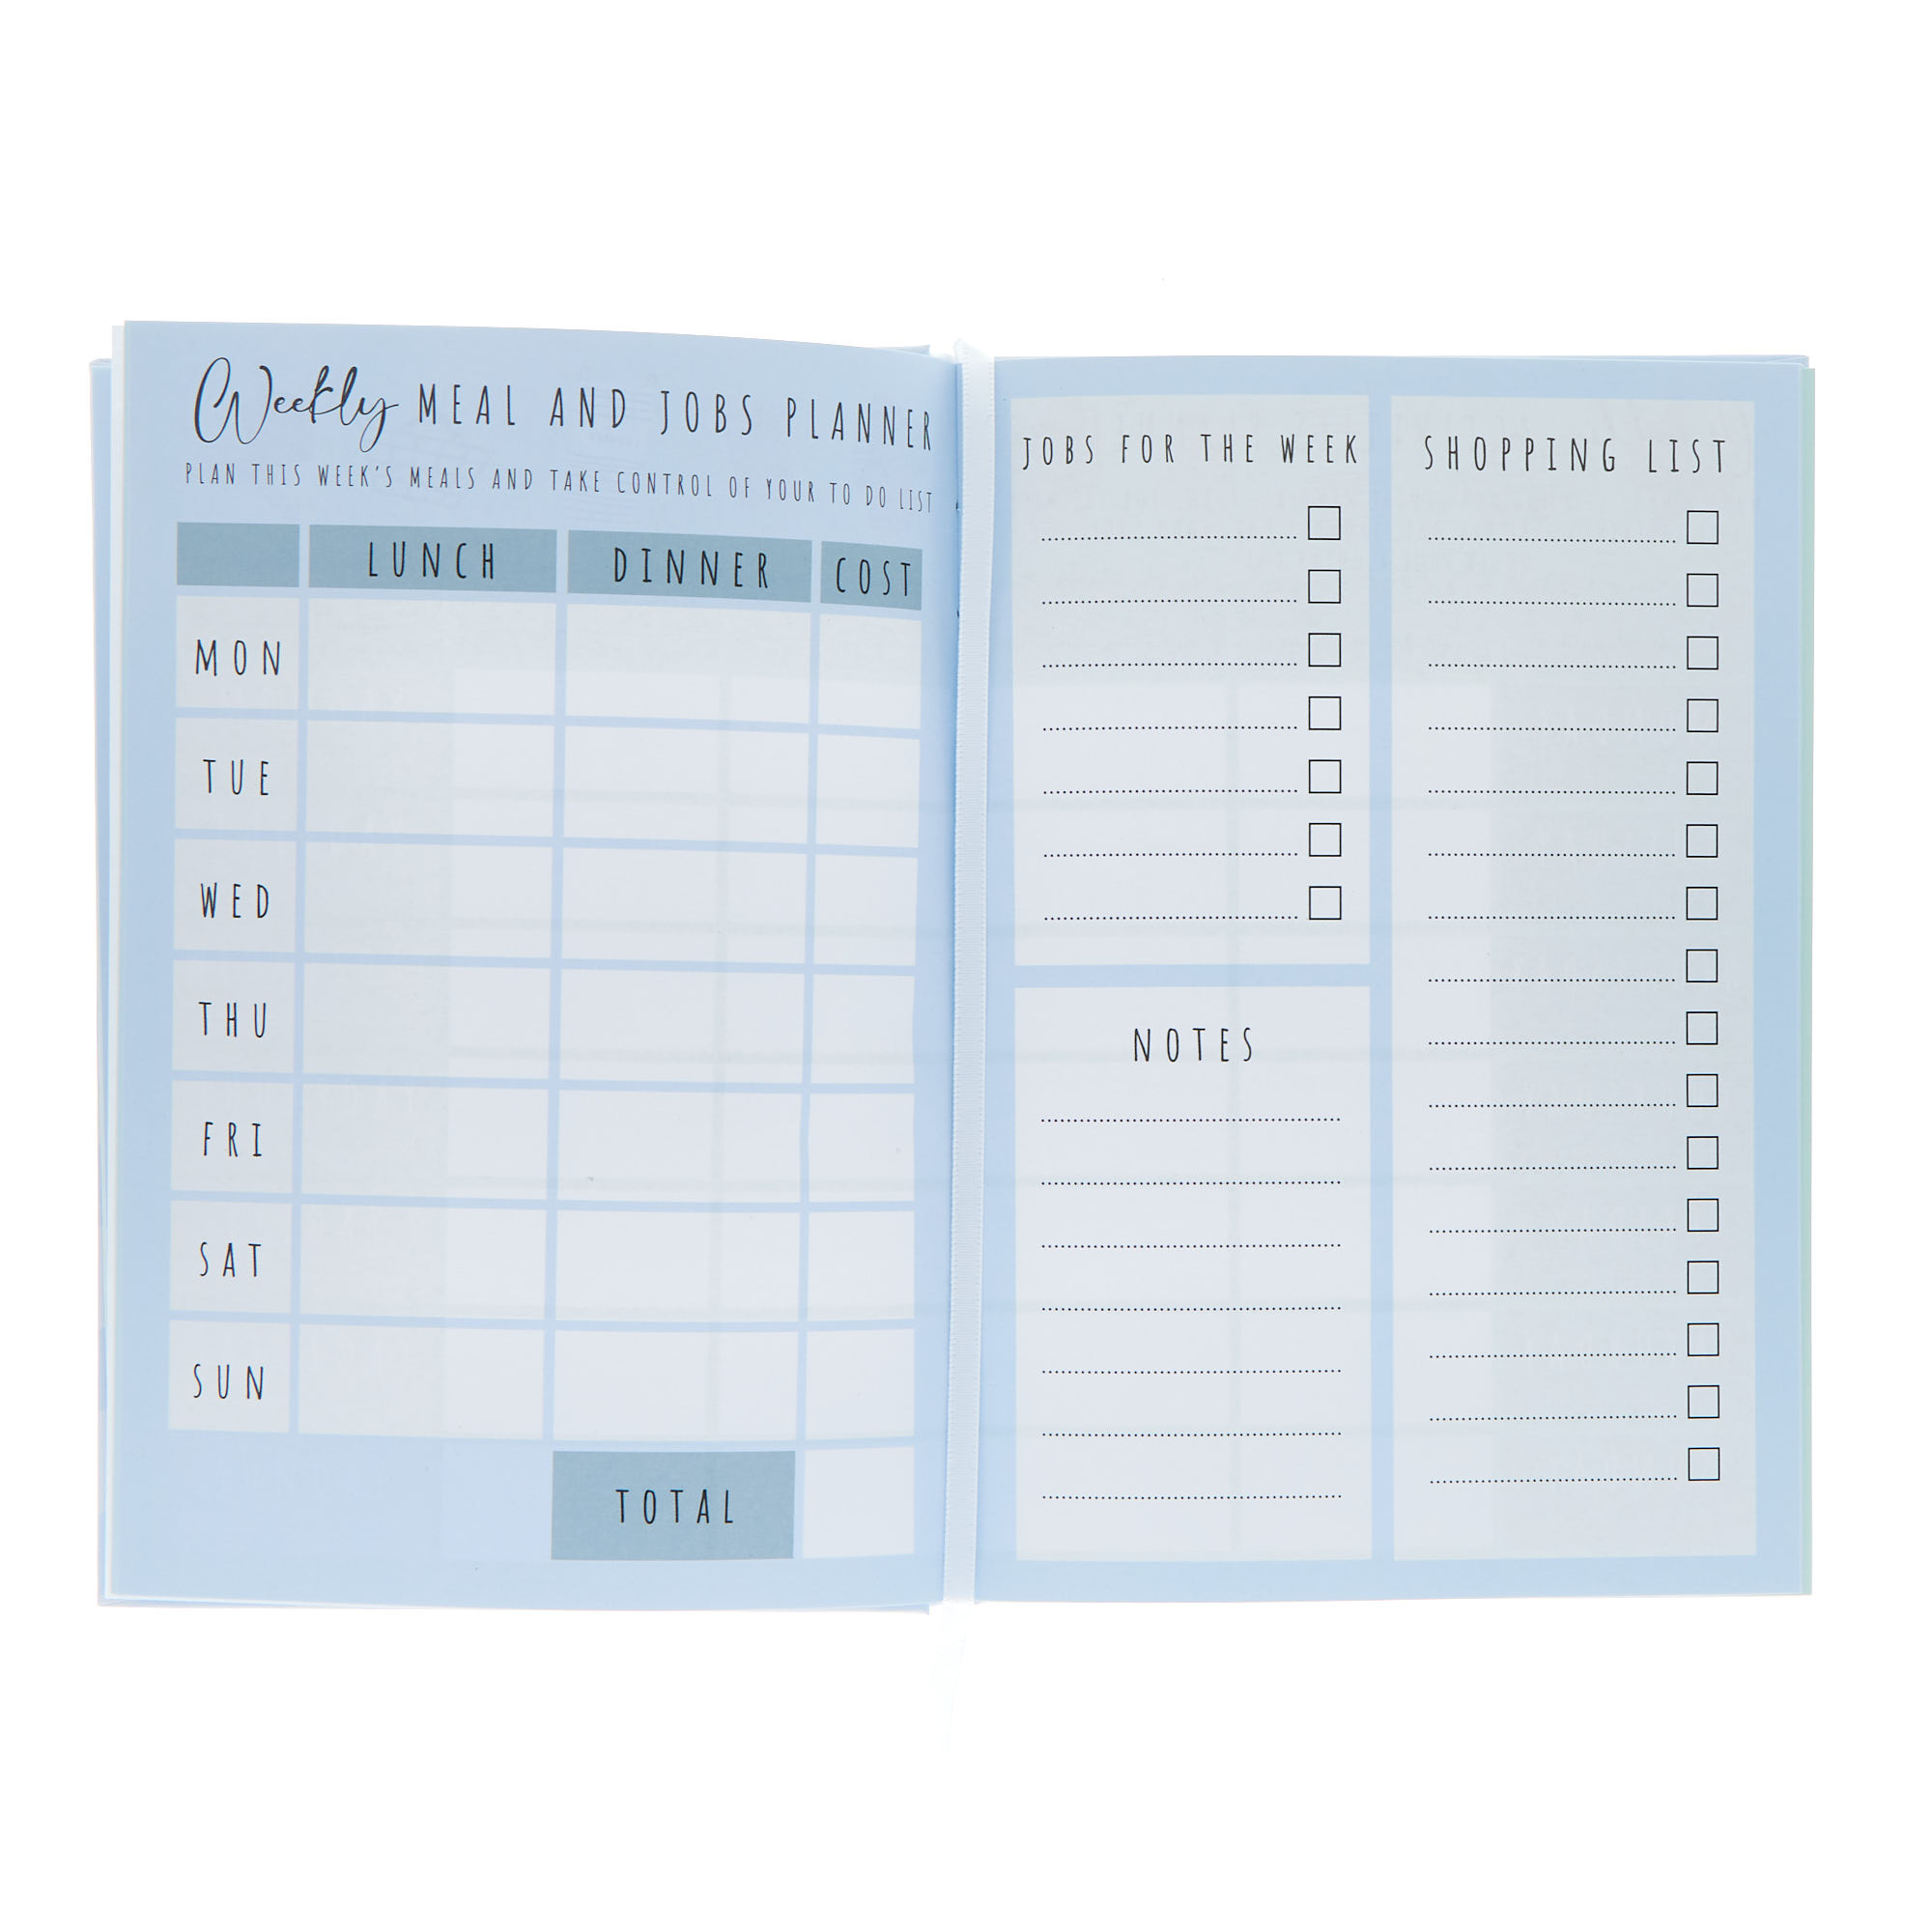 Sort Your Life Out Household & Budget Planner